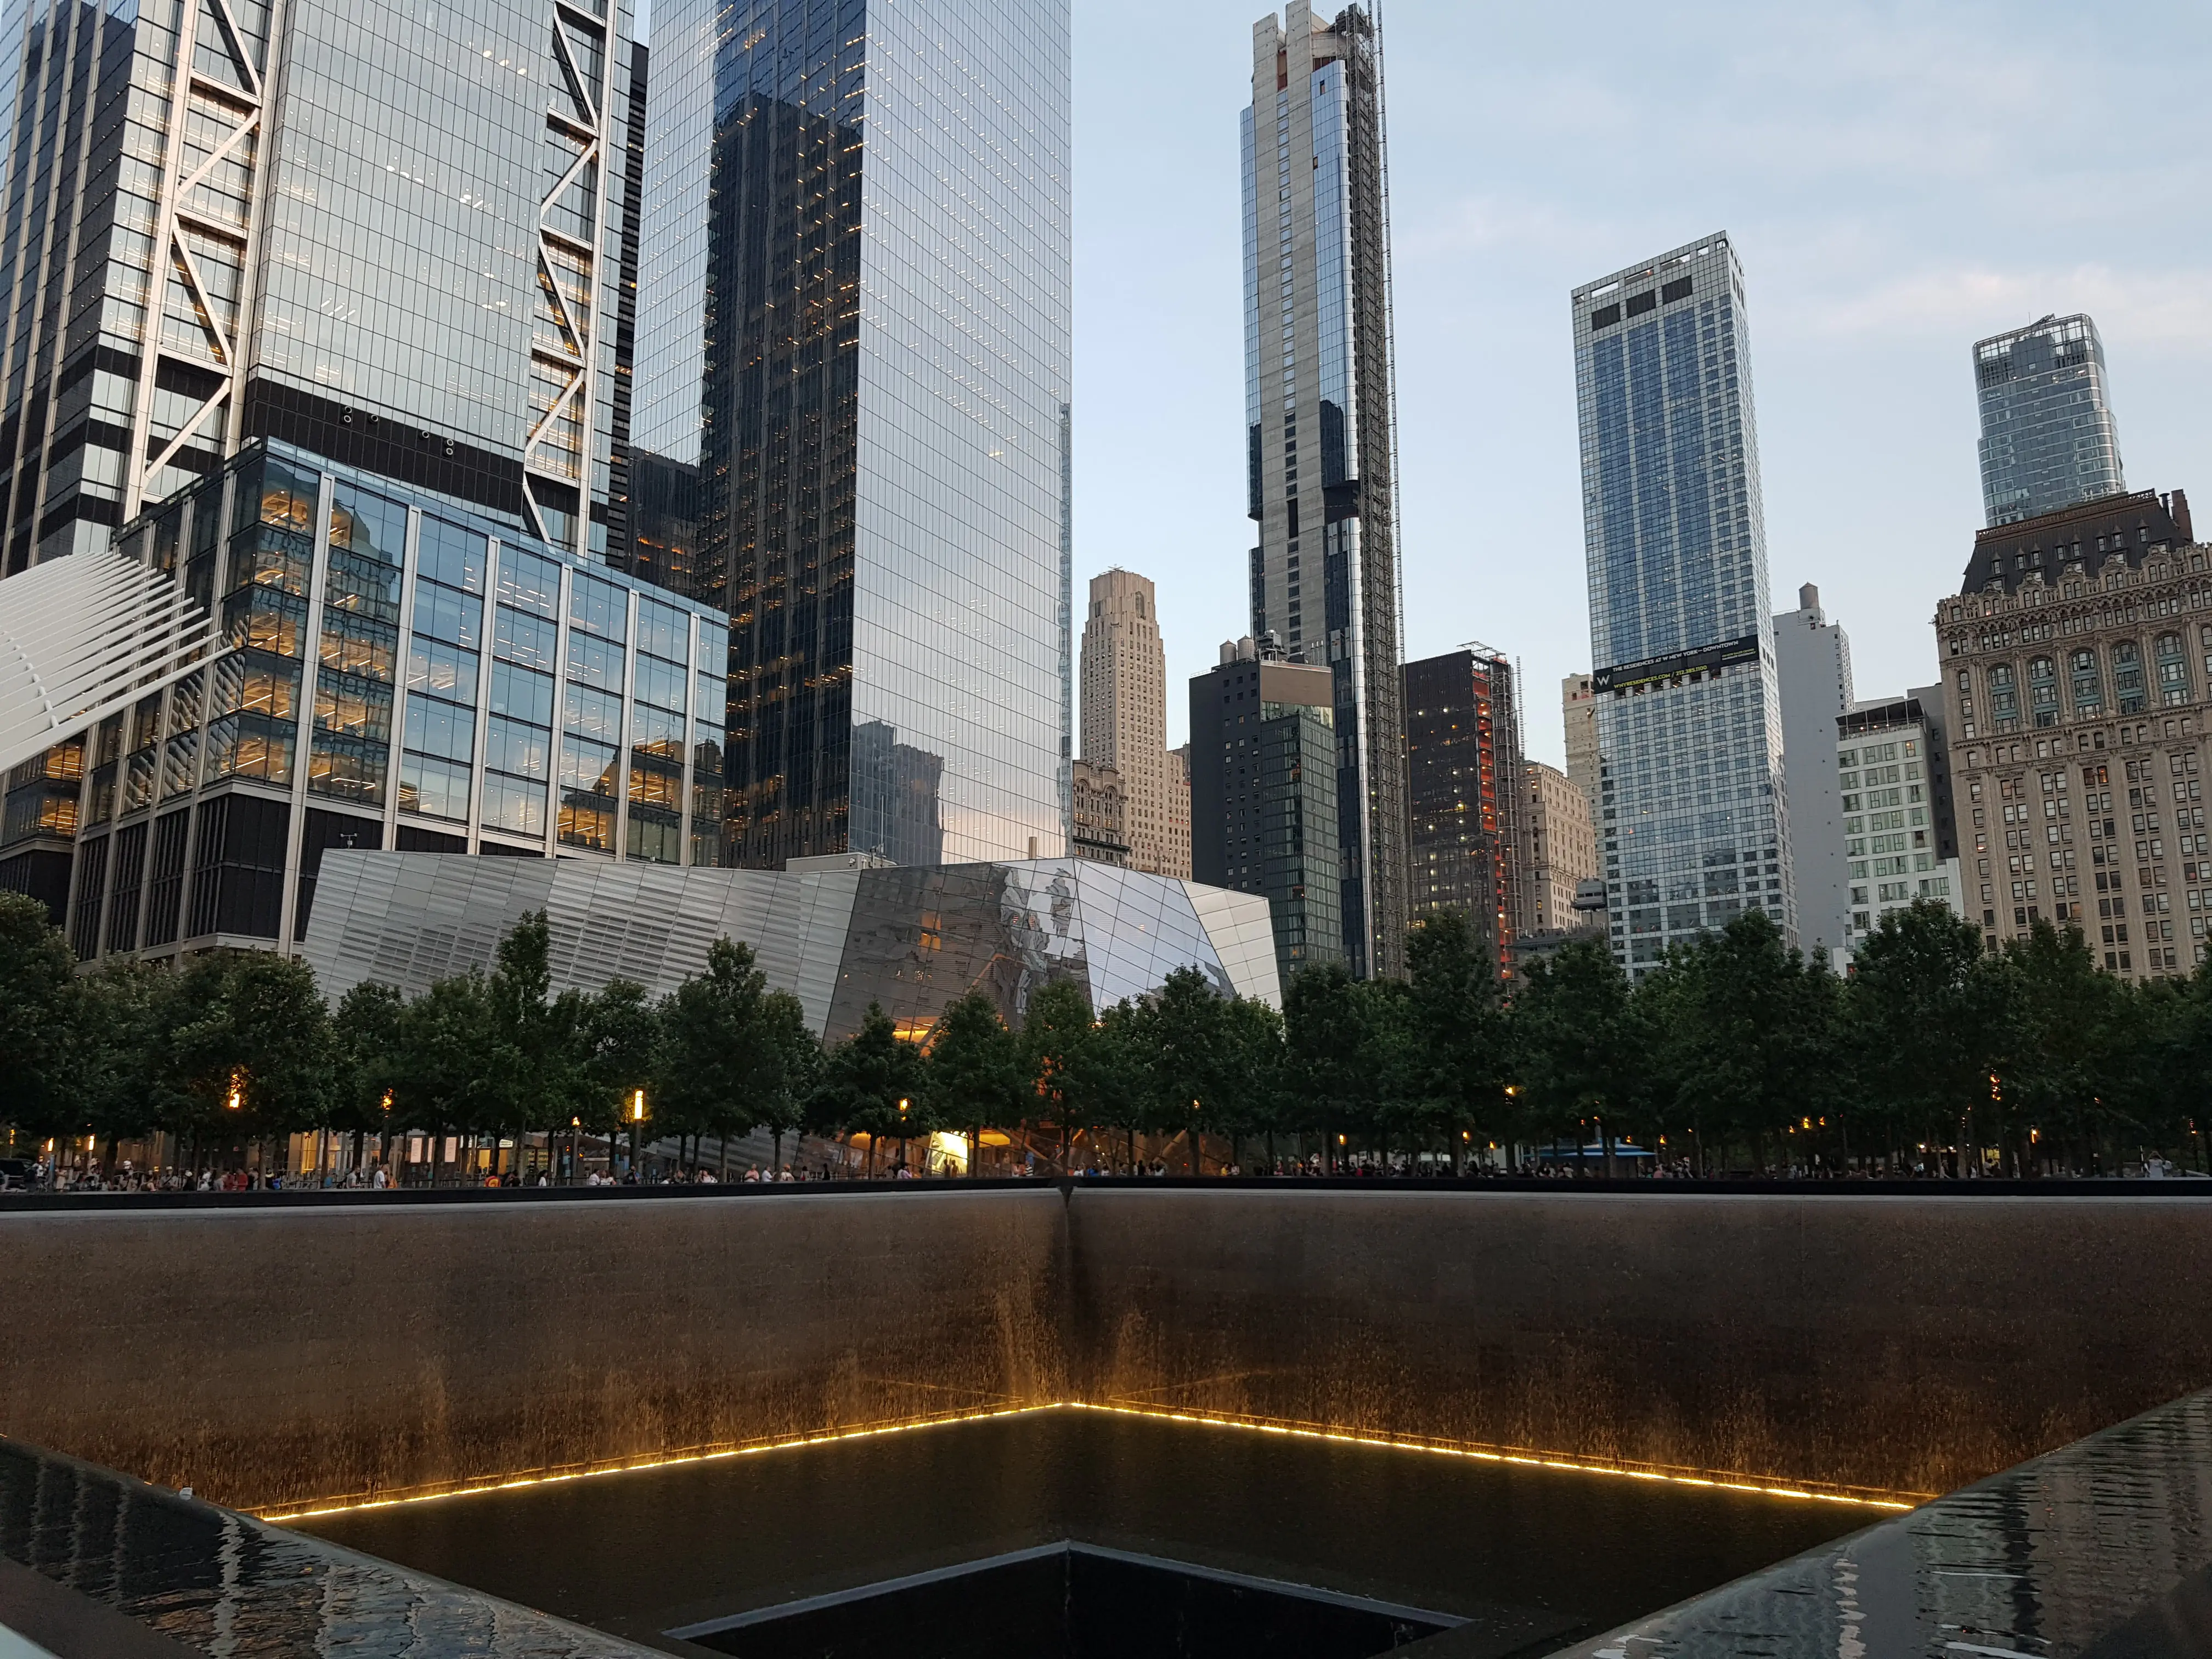 9/11 memorial to visit in nyc